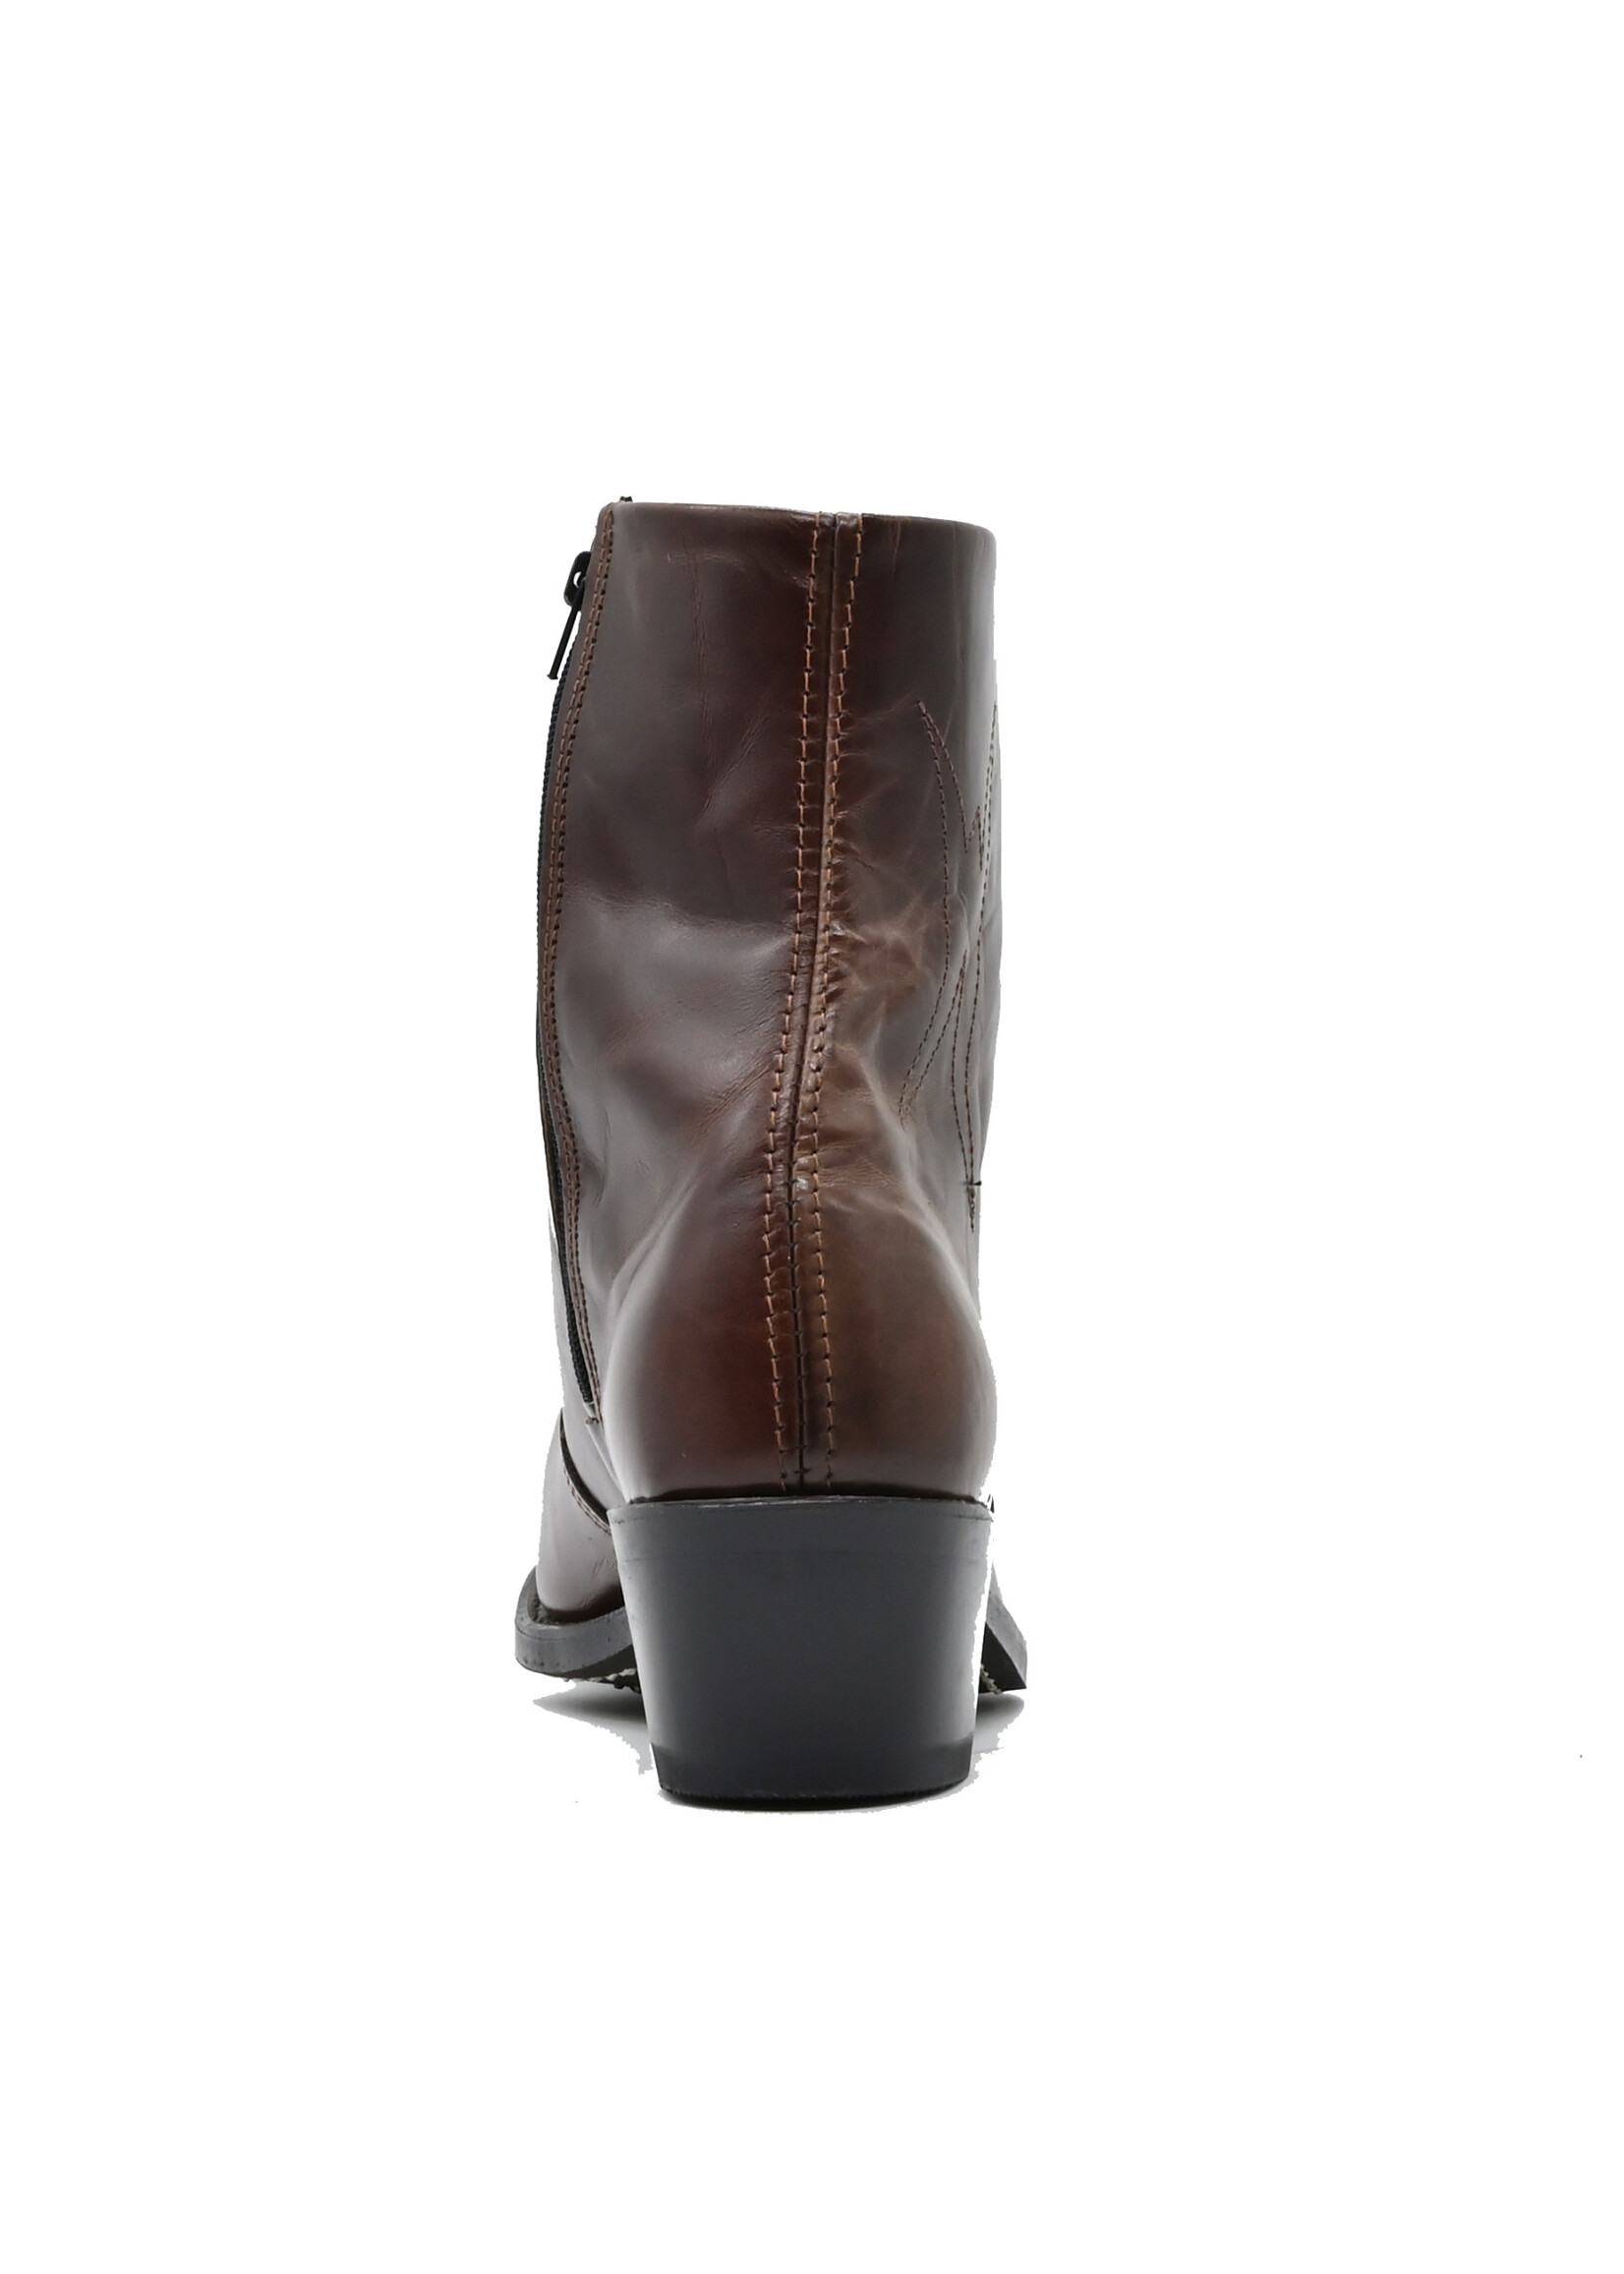 Double H 1711 Brown Boot (Size 6.5D, 7EE)